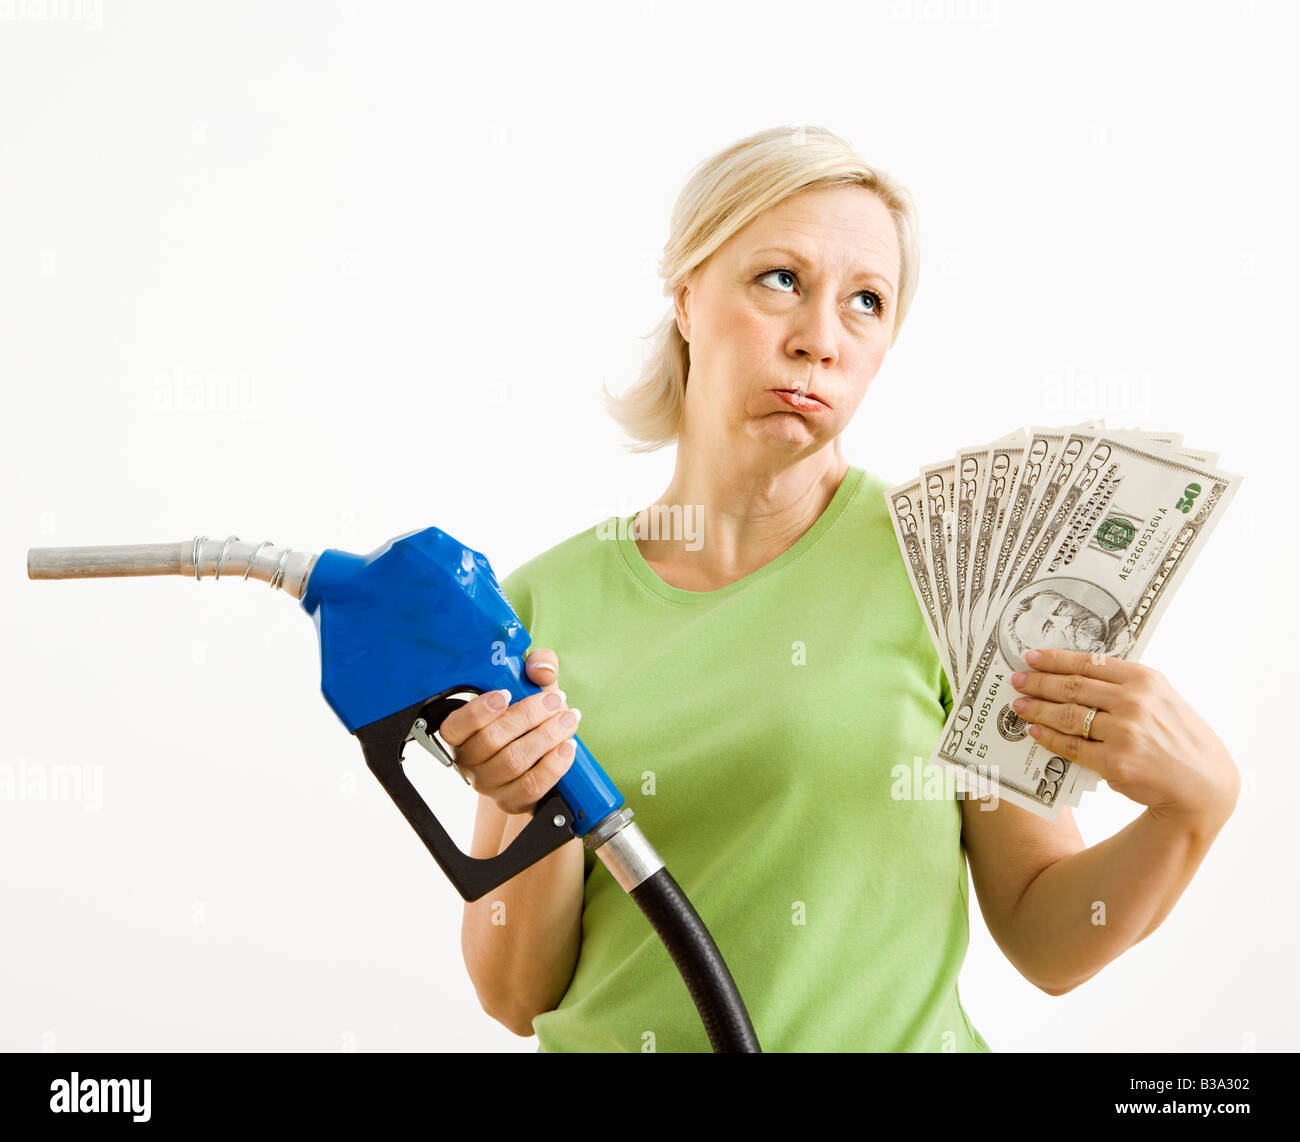 Portrait of distressed adult blonde woman holding gas nozzle and lots of money Stock Photo